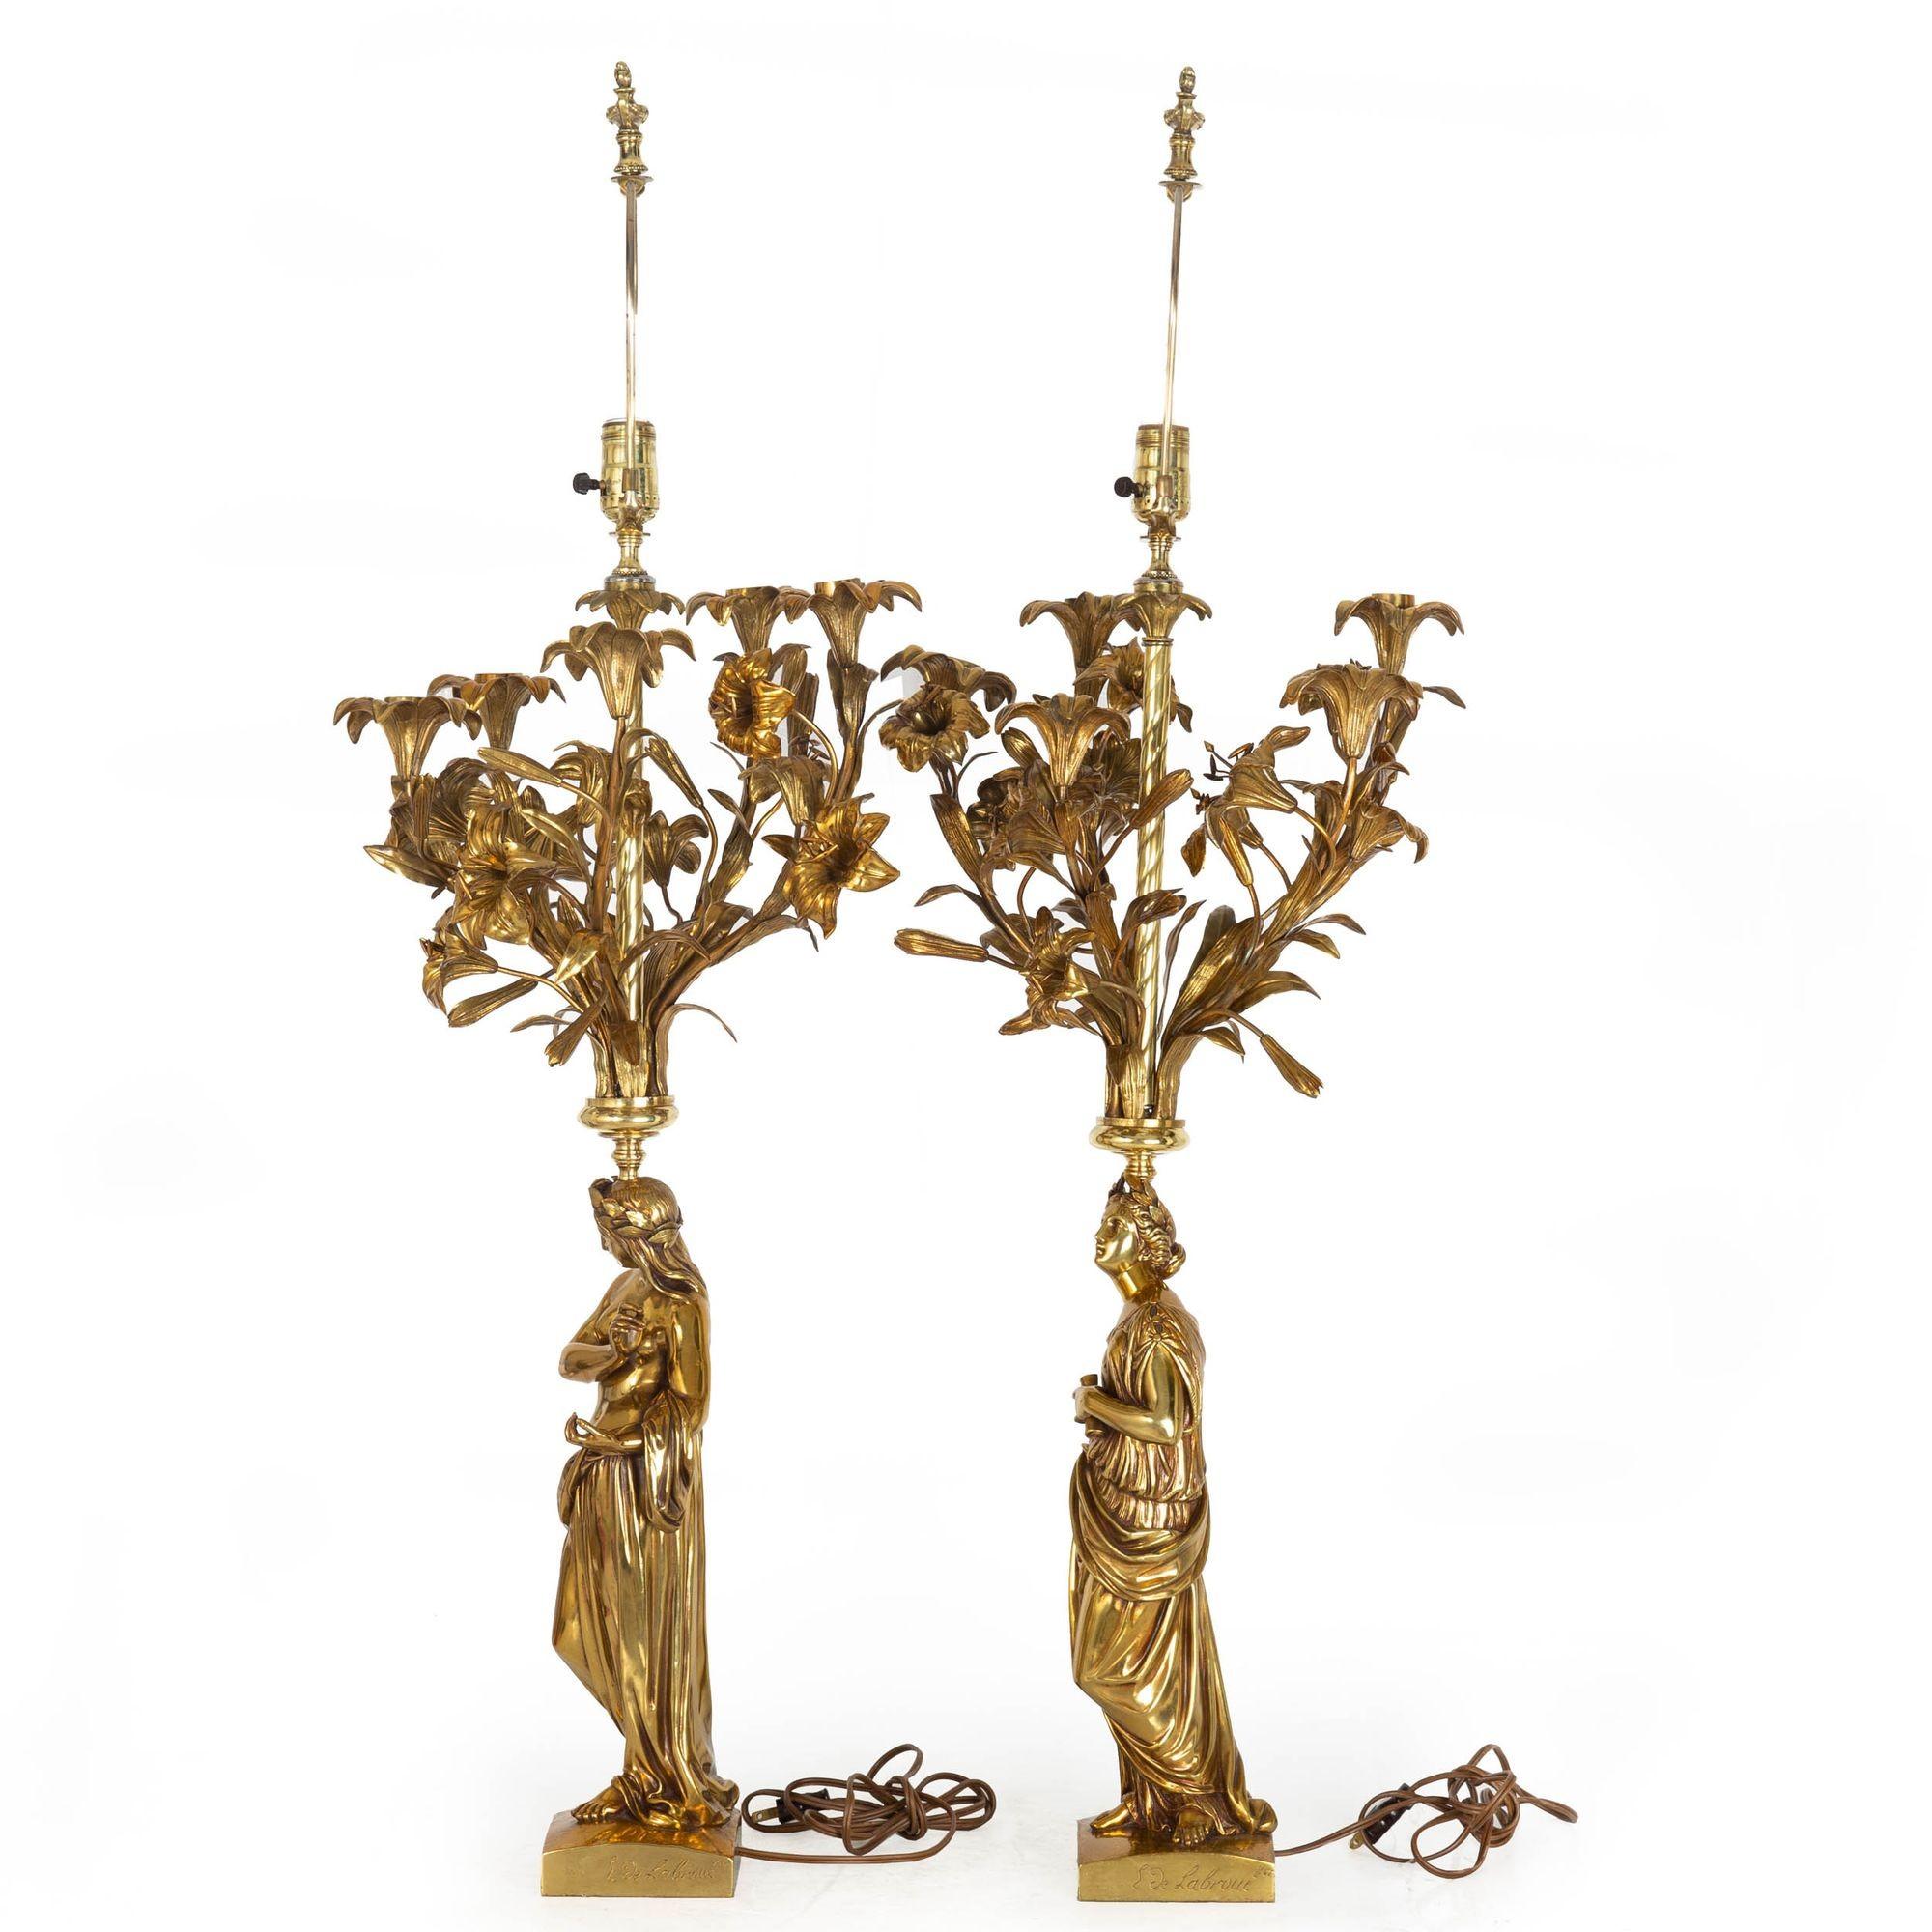 Pair of French “Poet & Musician” Bronze Sculpture Five-Light Candelabra In Good Condition For Sale In Shippensburg, PA